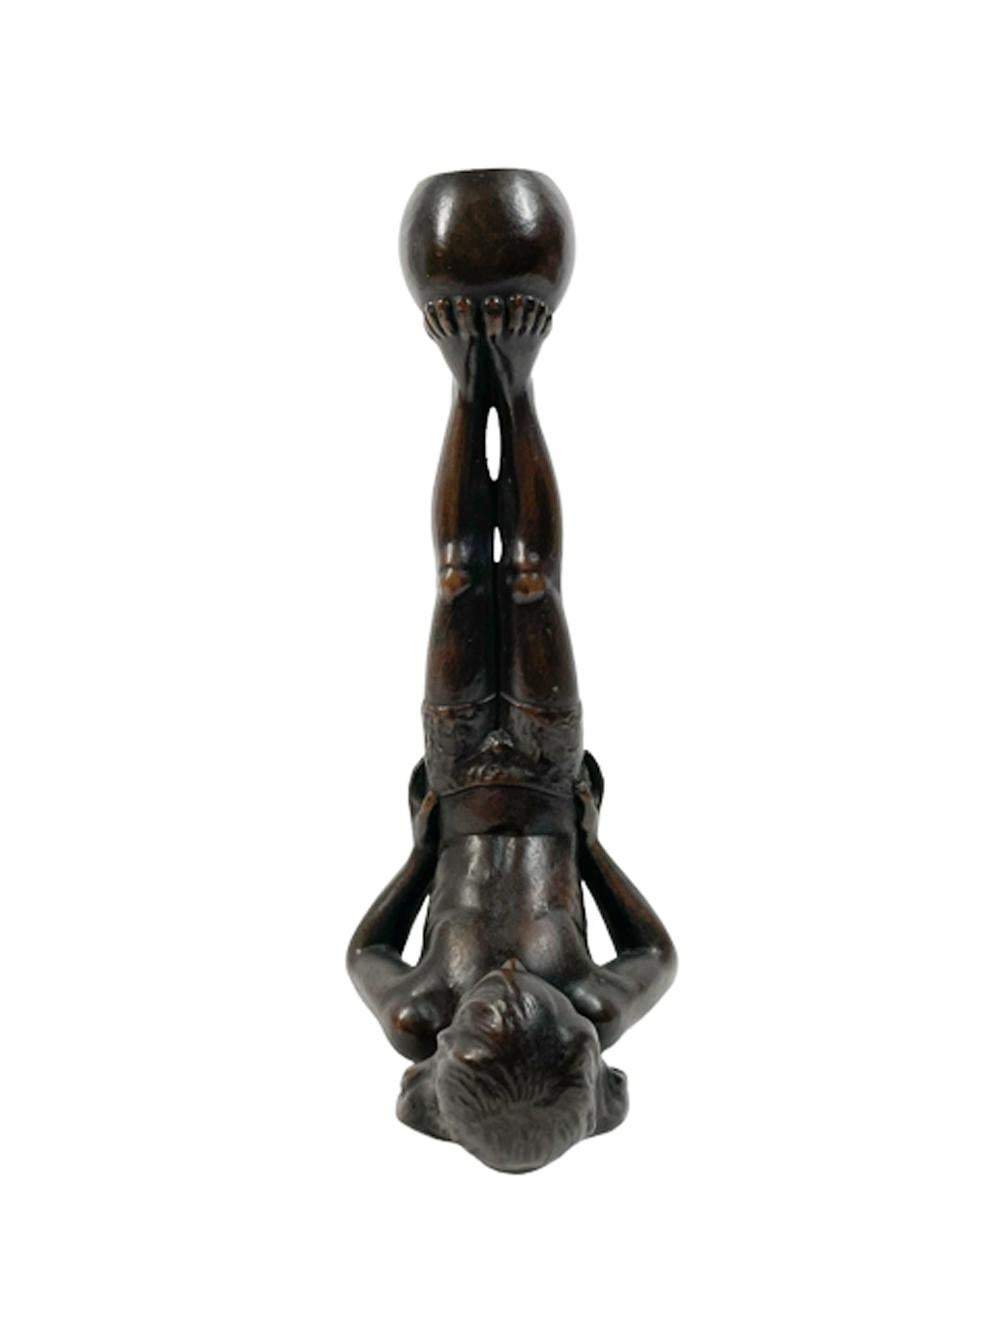 Art Deco Unusual Early 20th C Figural Candlestick of a Boy Holding a Ball on His Feet For Sale